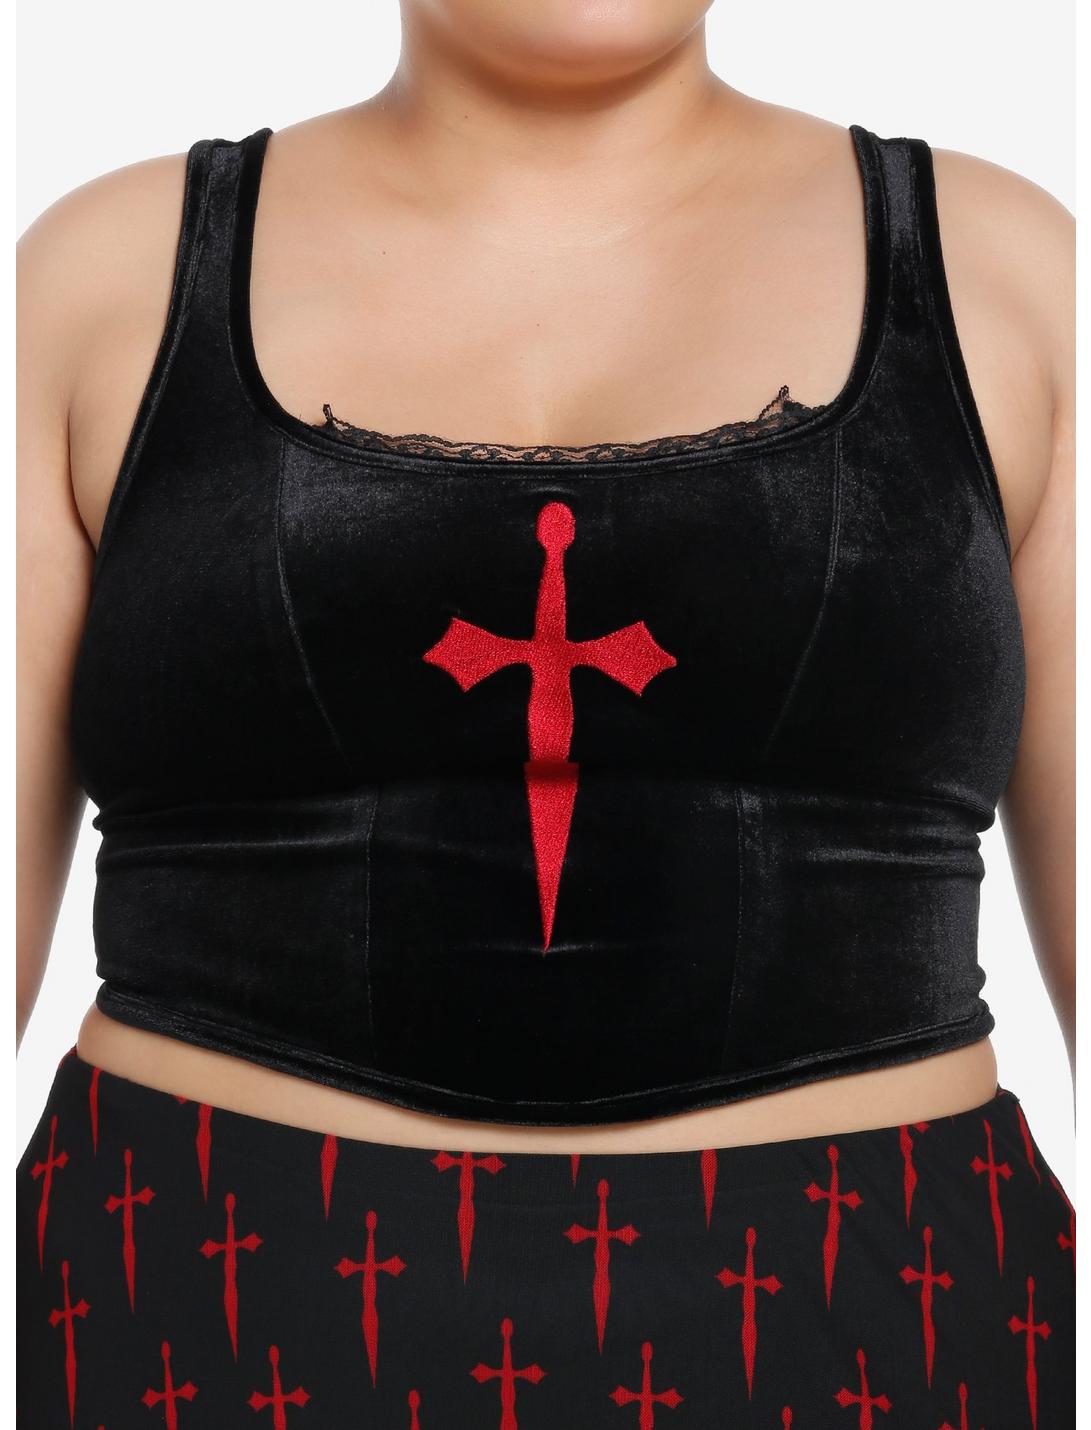 Social Collision Red Dagger Cross Velvet Lace-Up Girls Top Plus Size, RED, hi-res